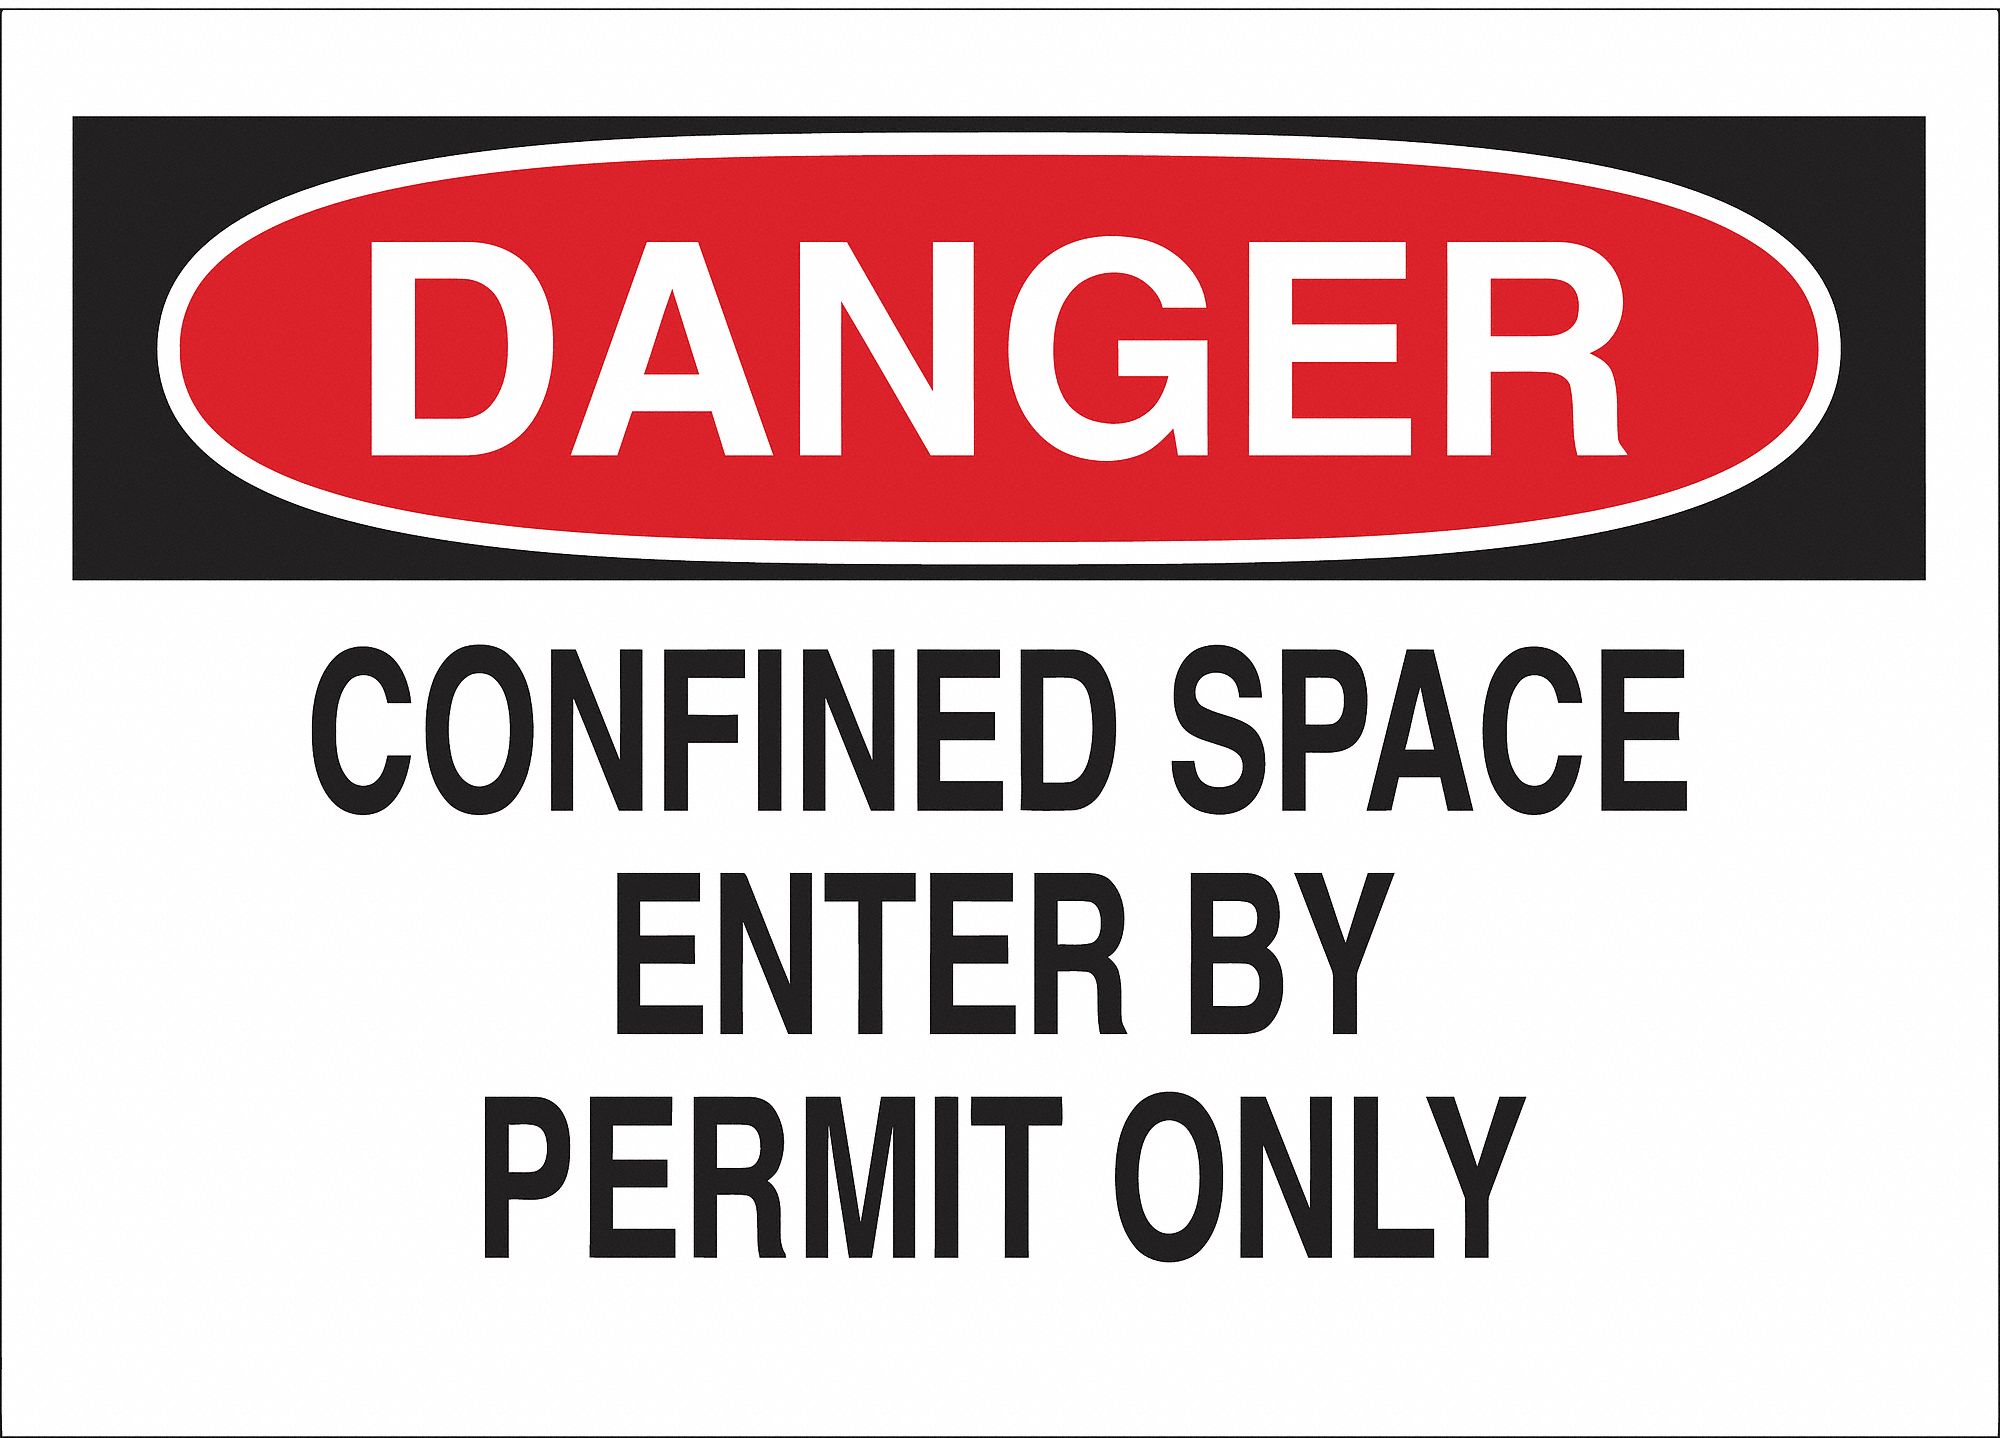 CONFINED SPACE PERMIT ONLY DANGER SIGN, ADHESIVE, BLACK/RED/WHITE, 7 X 10 IN